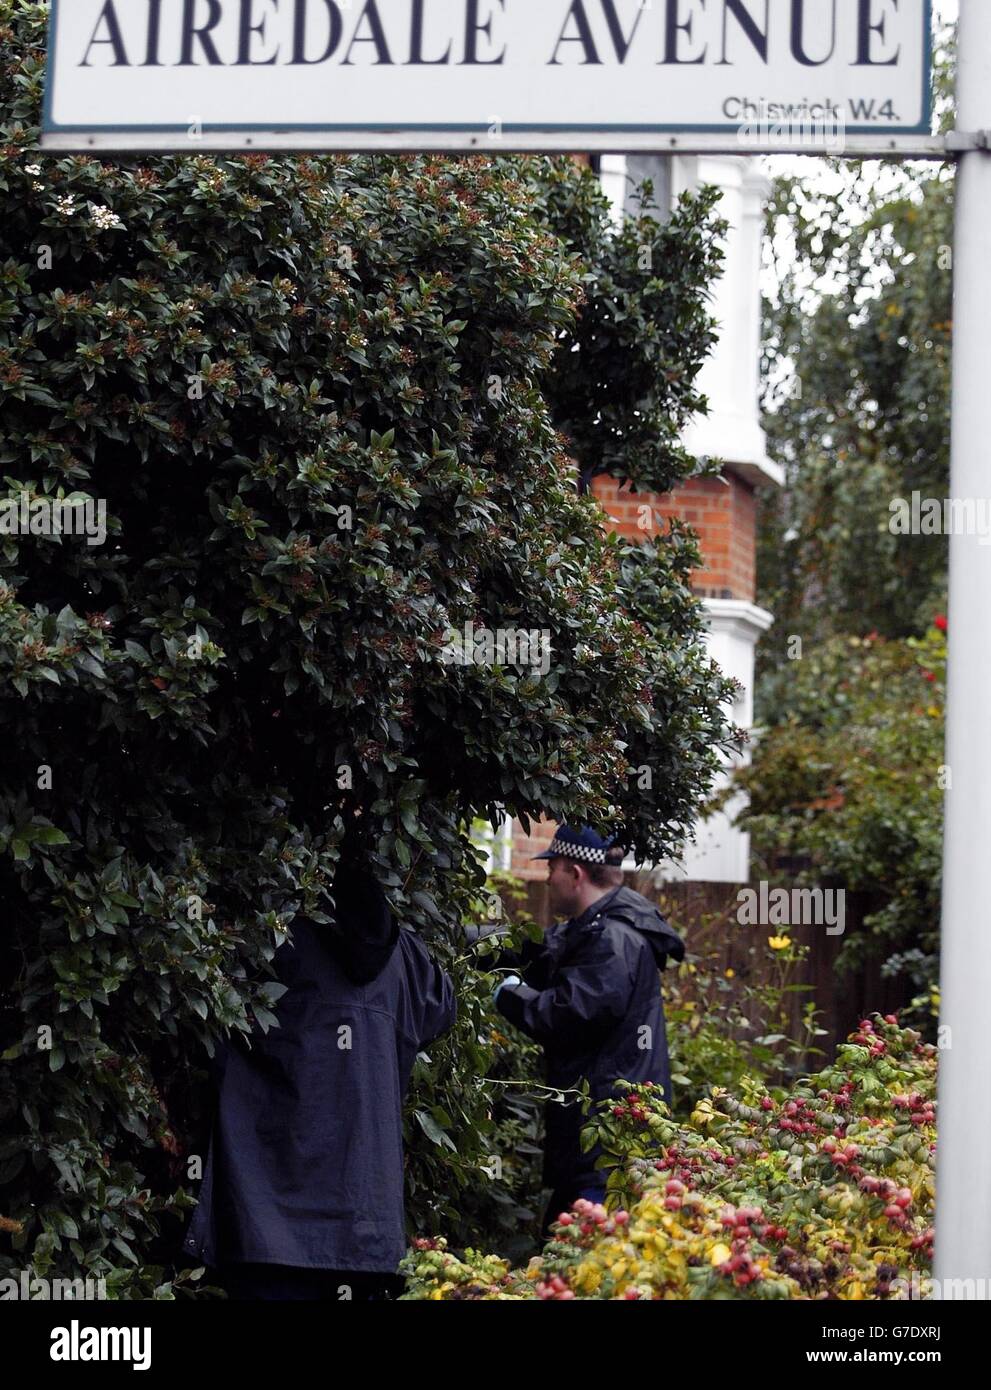 Policemen search bushes in gardens inside a cordoned area outside a house in Airedale Avenue, Chiswick, where a man was stabbed to death when he caught a thief robbing his home. Stock Photo